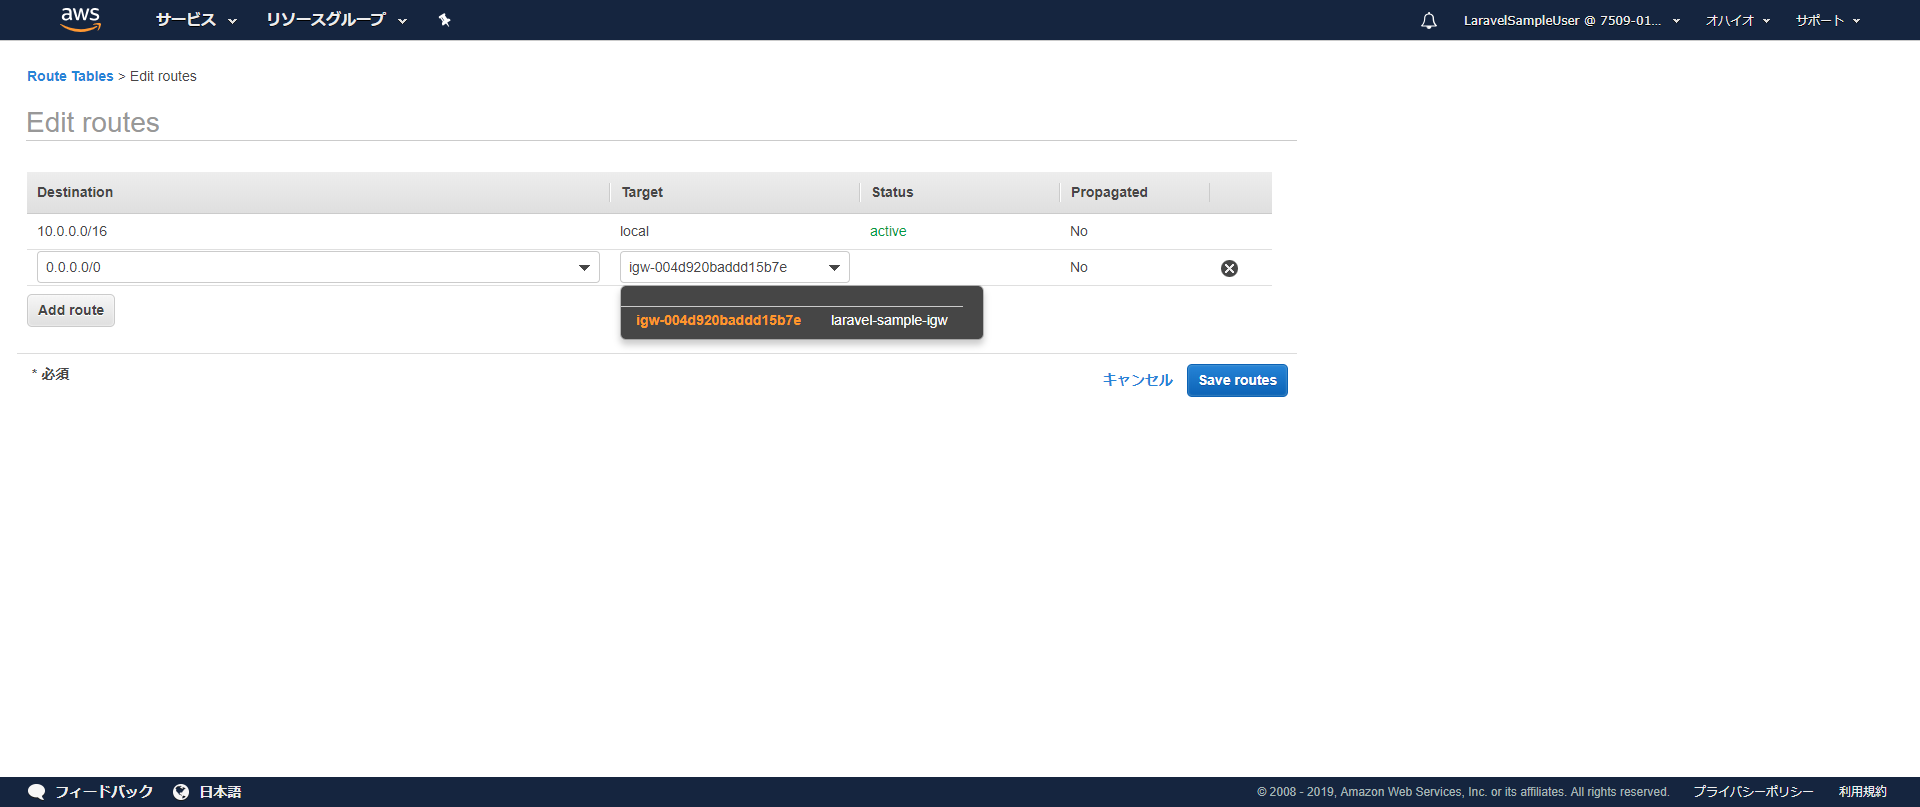 screencapture-us-east-2-console-aws-amazon-vpc-home-2019-01-24-10_56_41.png